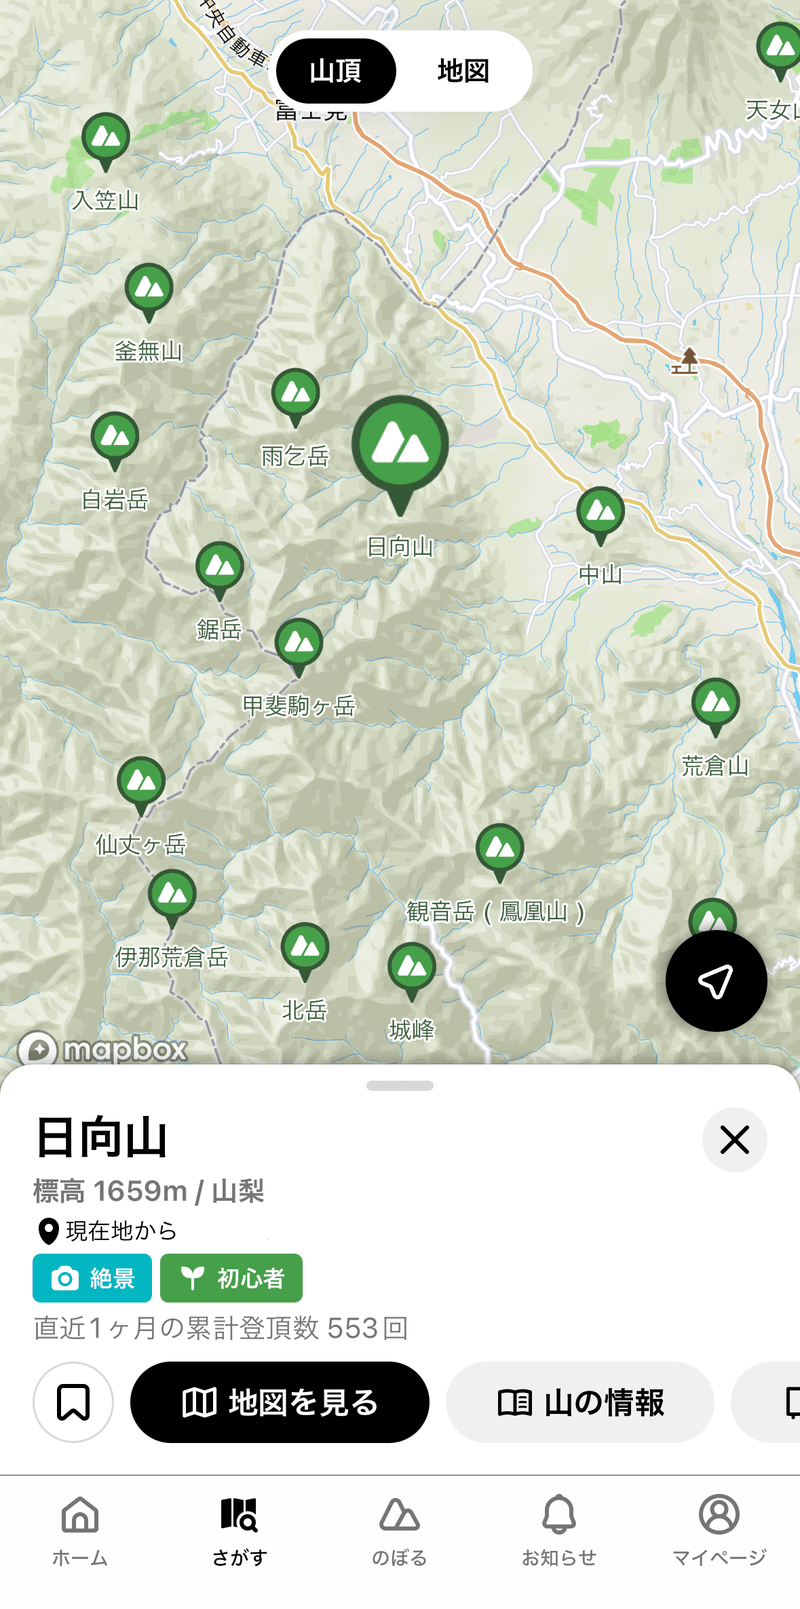 "Mountain search page showing mountain on map"